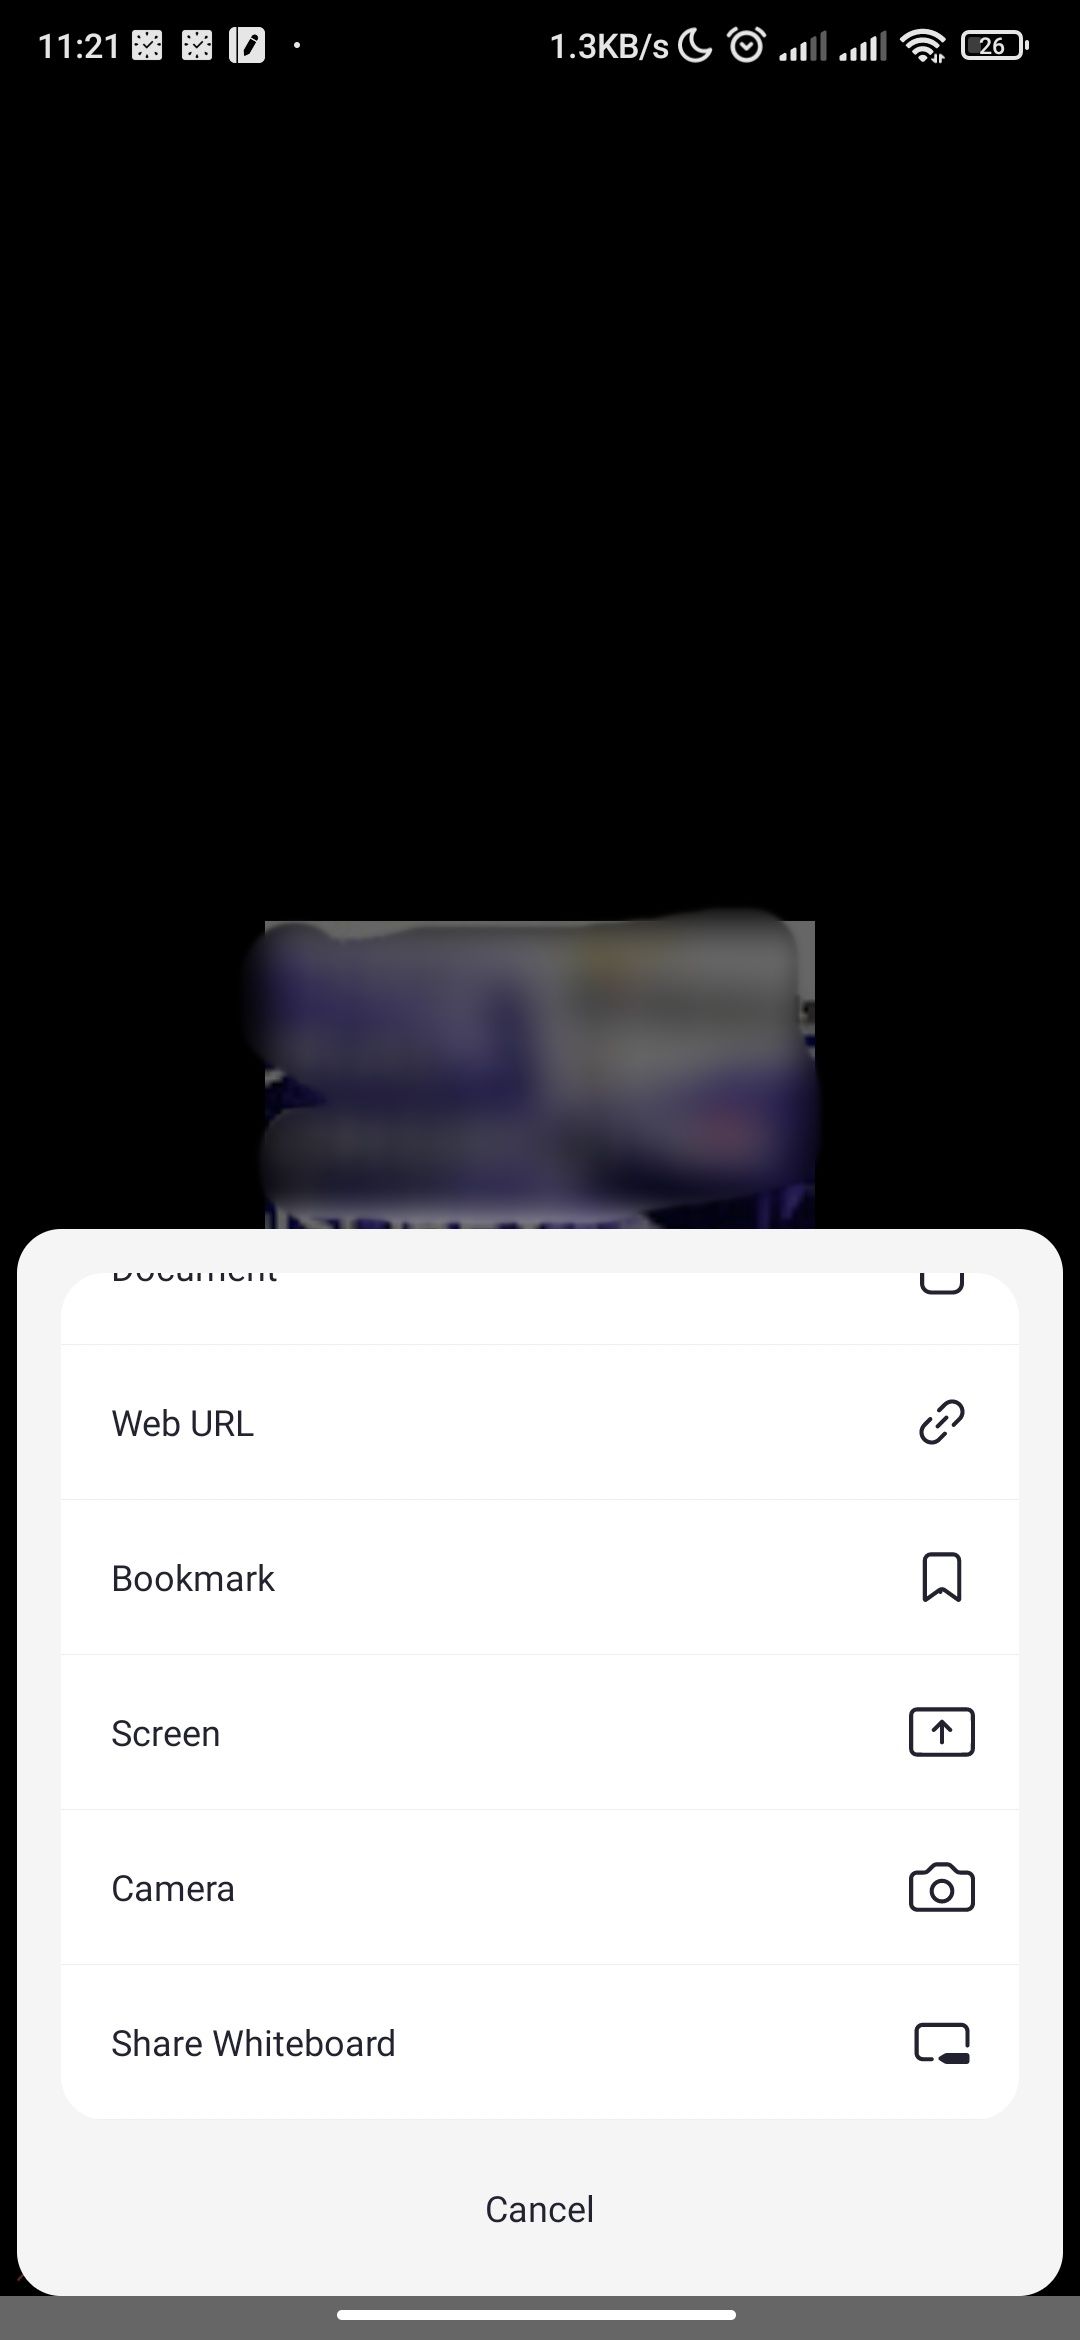 Share Whiteboard option in Zoom for Android